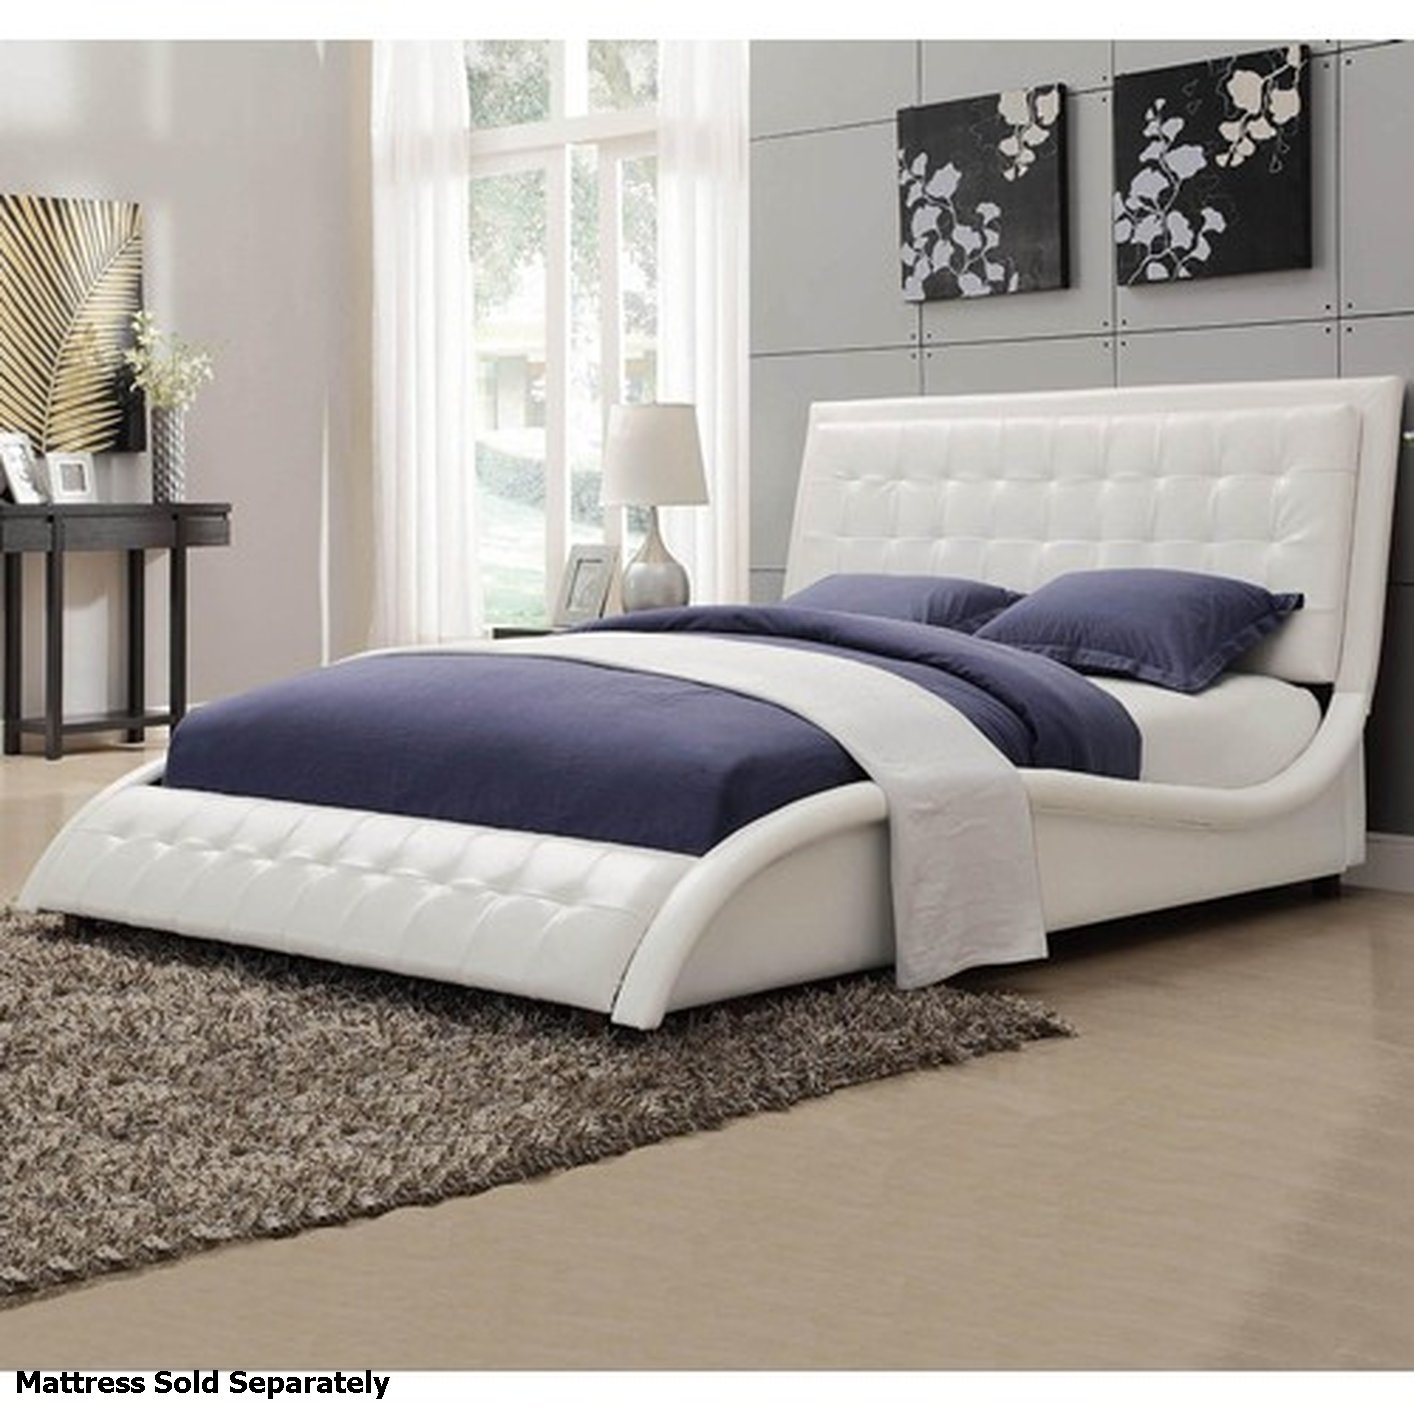 queen size bed queen sized bed b29 all about perfect bedroom decoration diy with queen VATFYOI